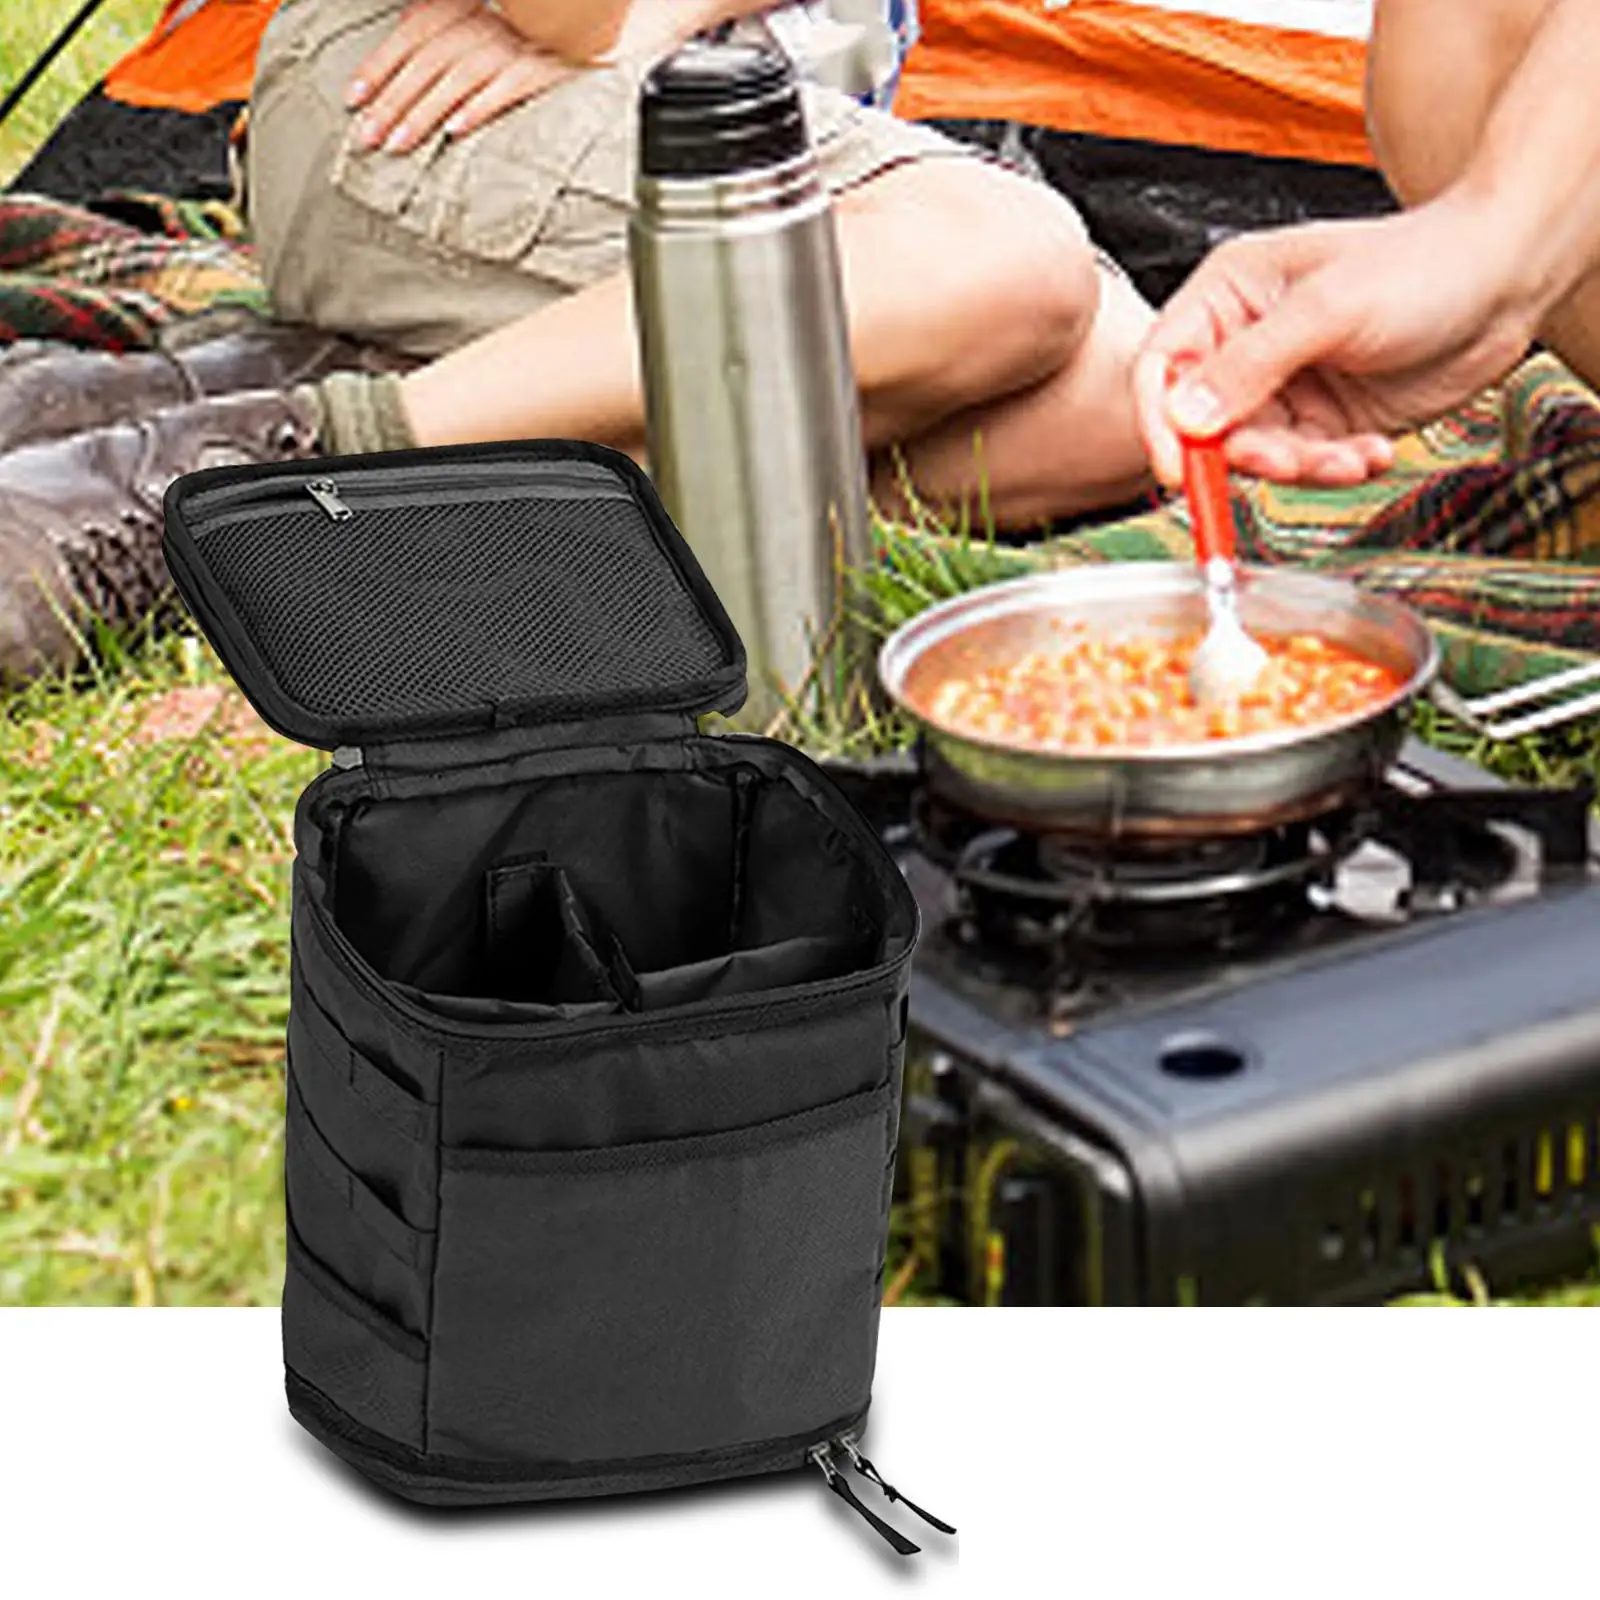 Camping Cookware Storage Bag Picnic Bag Carrying Bag Lightweight Waterproof Large Tote Pouch Carry Case for Outdoor Activities